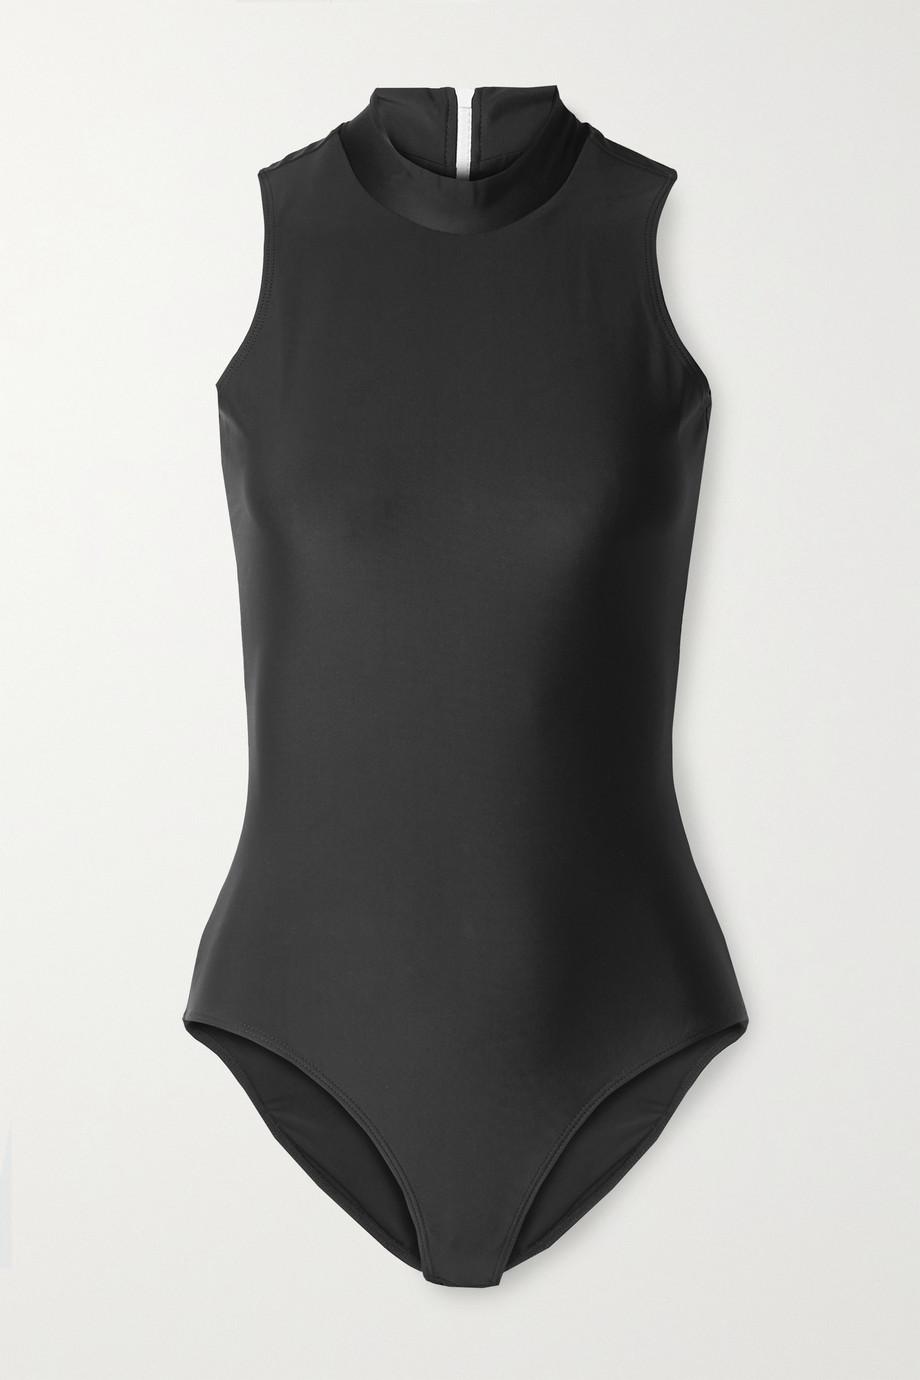 + NET SUSTAIN recycled swimsuit by COVER SWIM